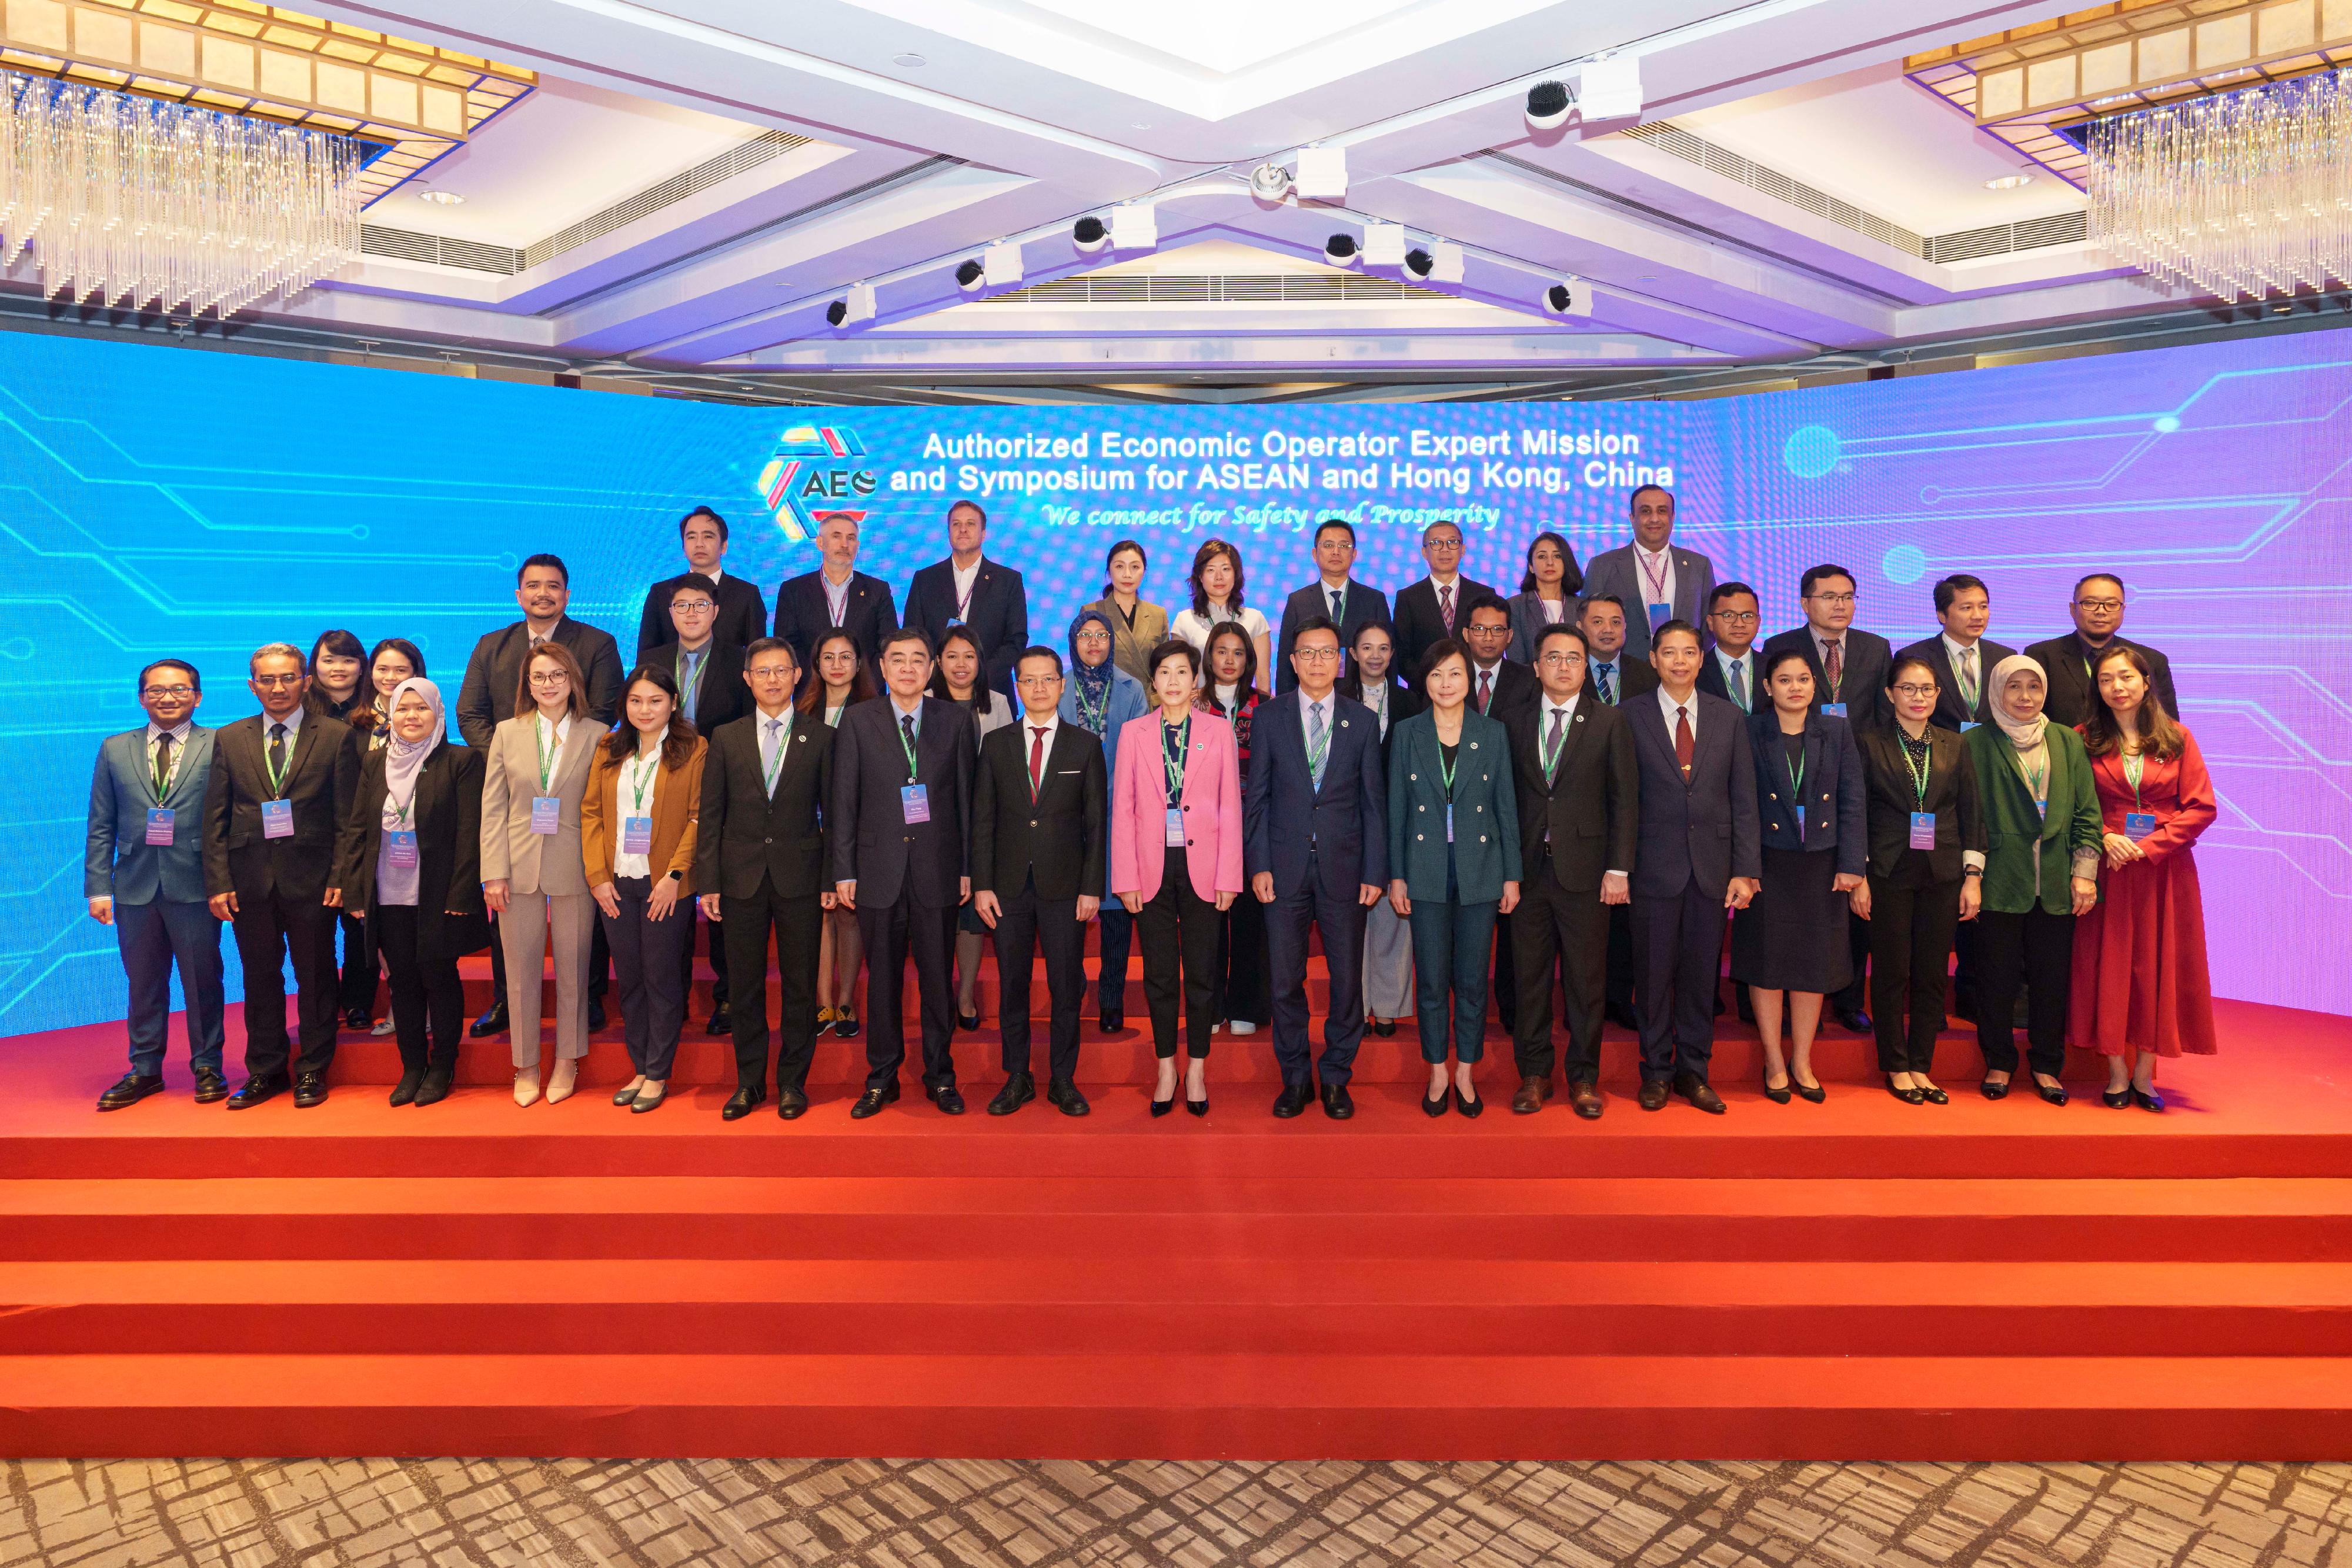 The Commissioner of Customs and Excise, Ms Louise Ho (first row, centre), takes a photo with participants at the AEO Symposium for ASEAN and Hong Kong, China, held today (November 30).
